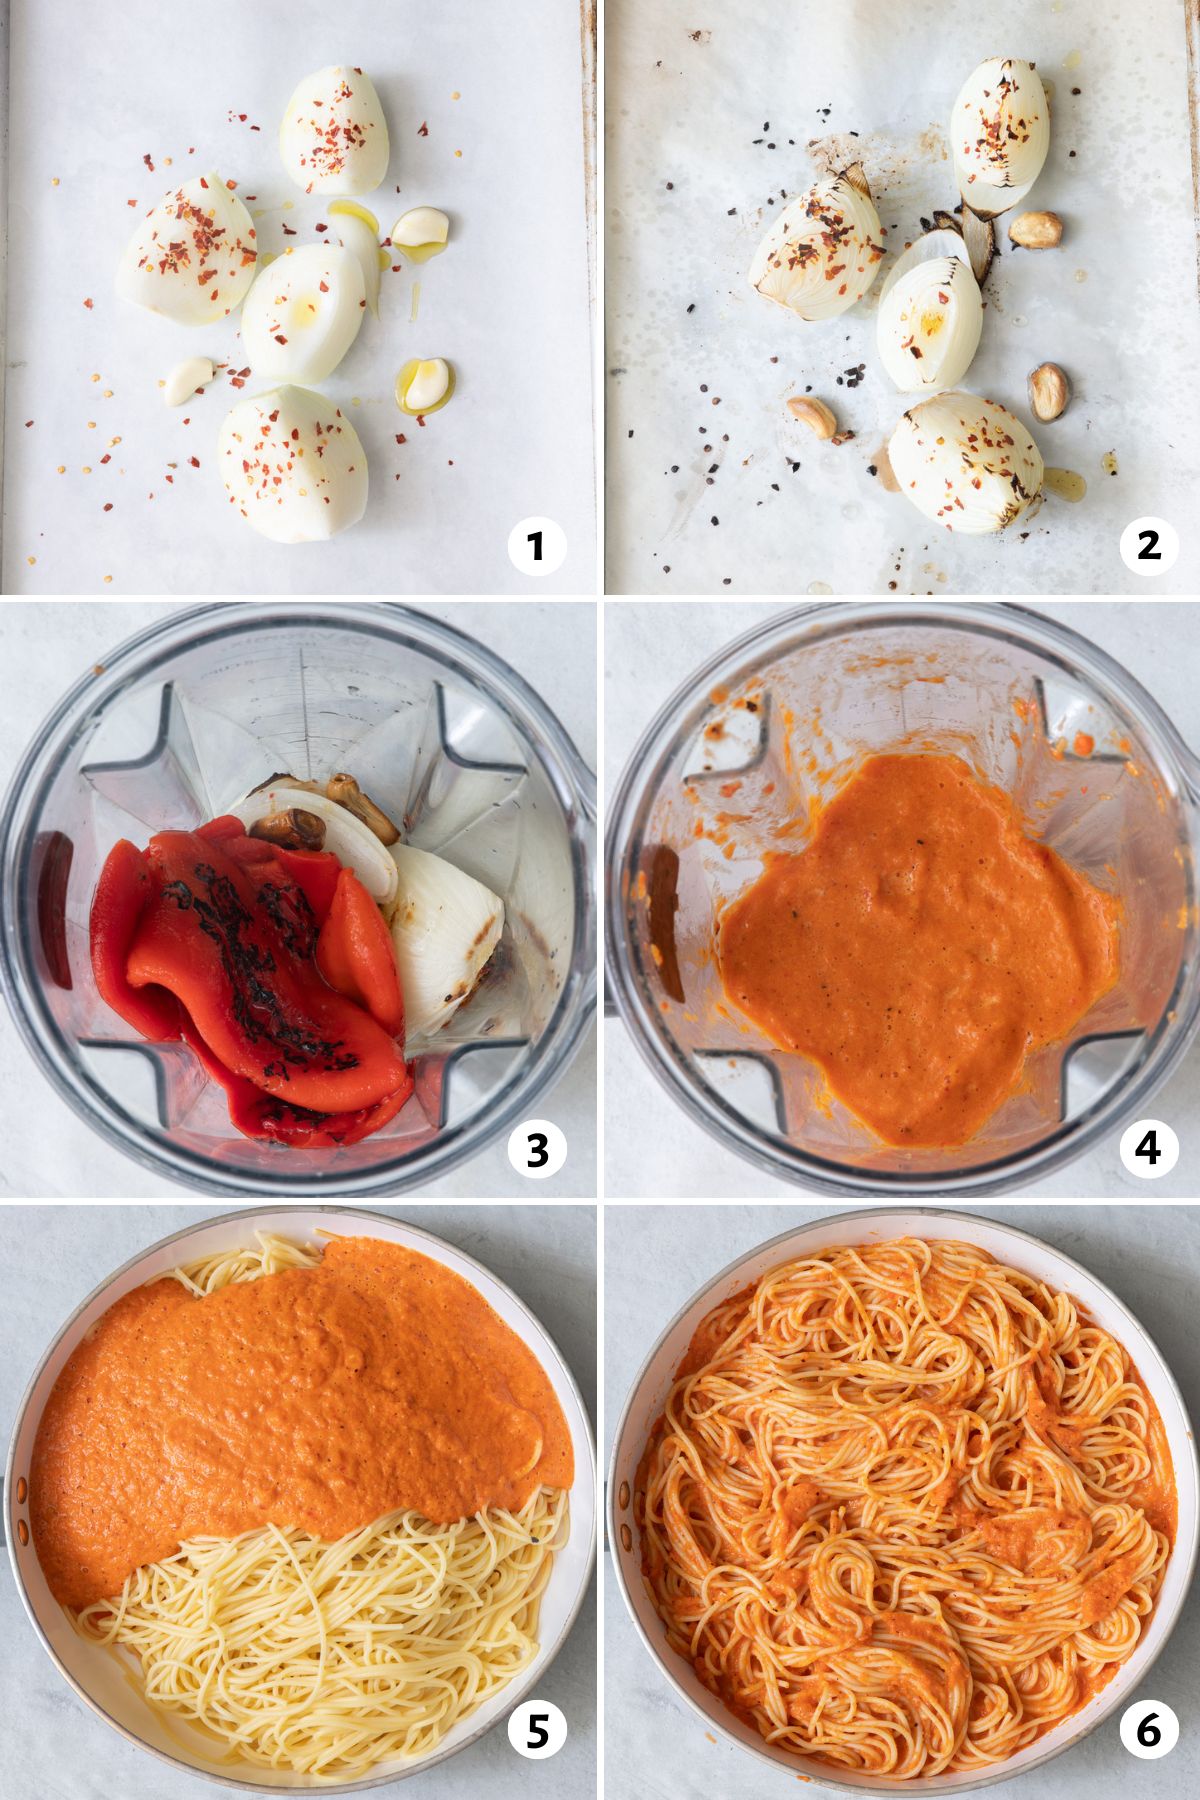 Collage of two images showing a food processor with ingredients before and after blending